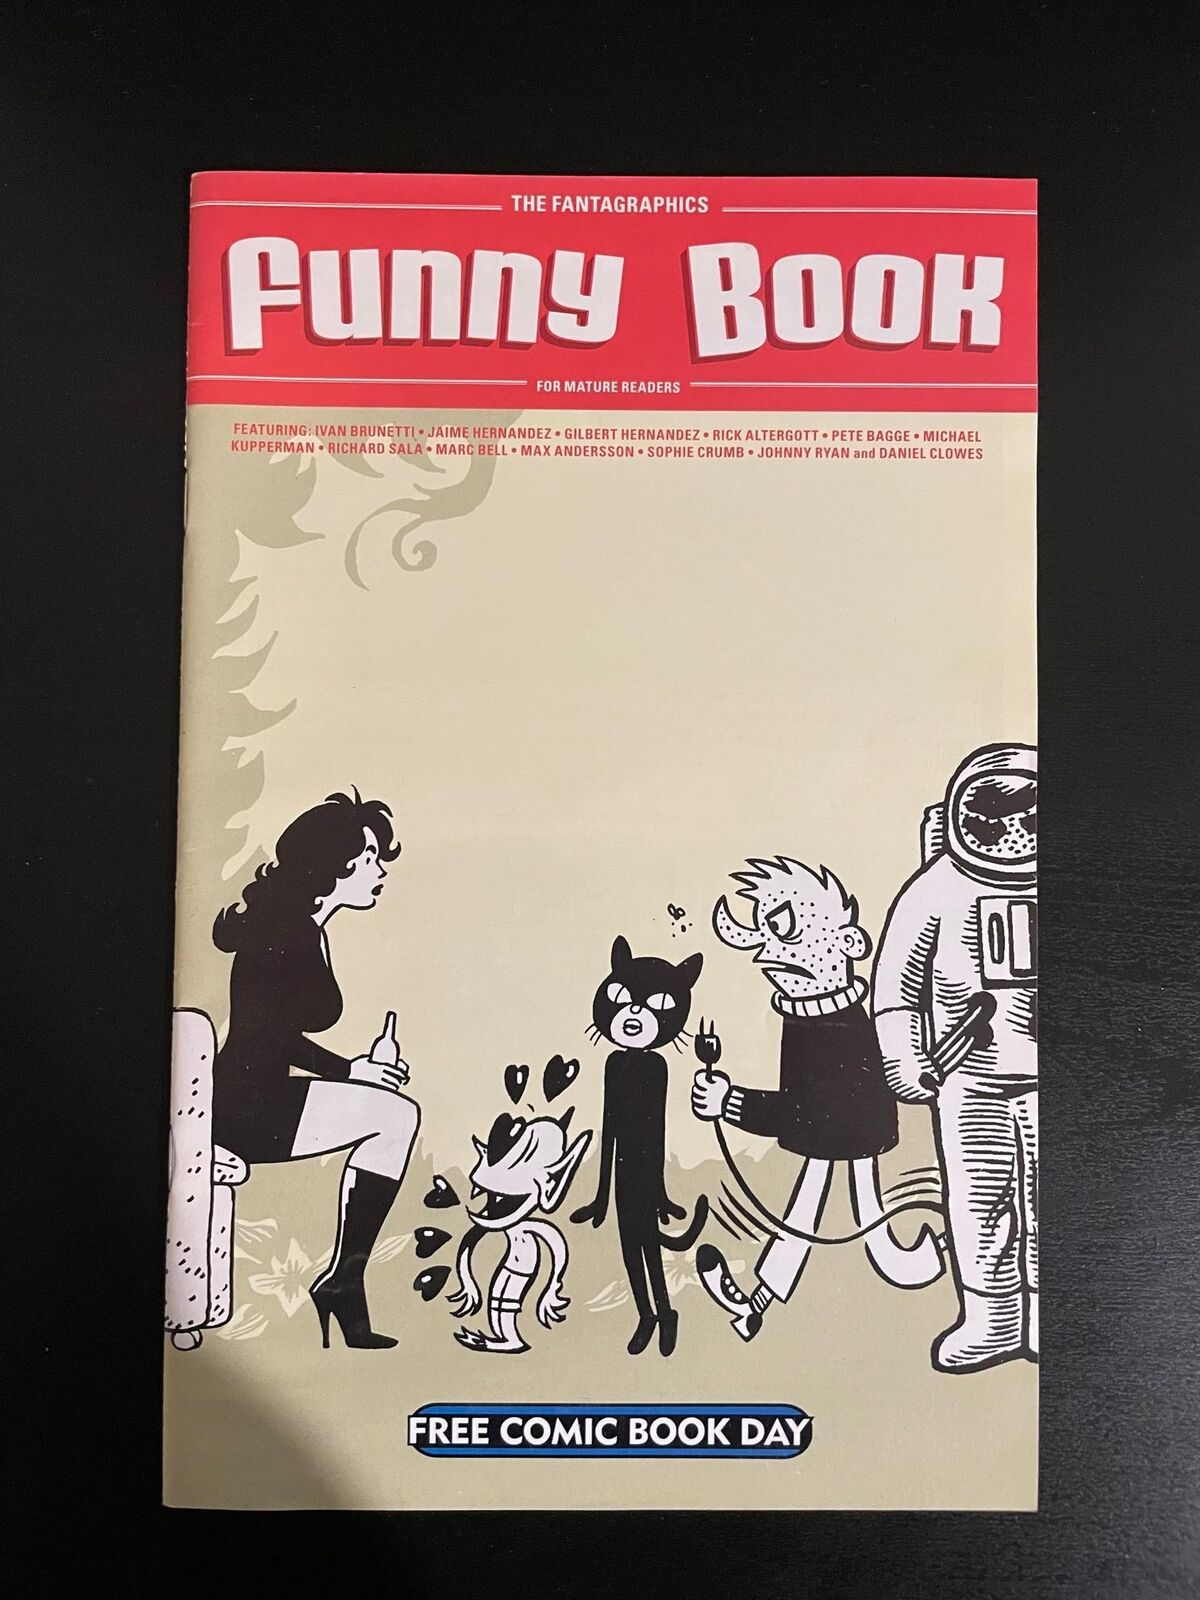 The Fantagraphics Funny Book - Free Comic Book Day 